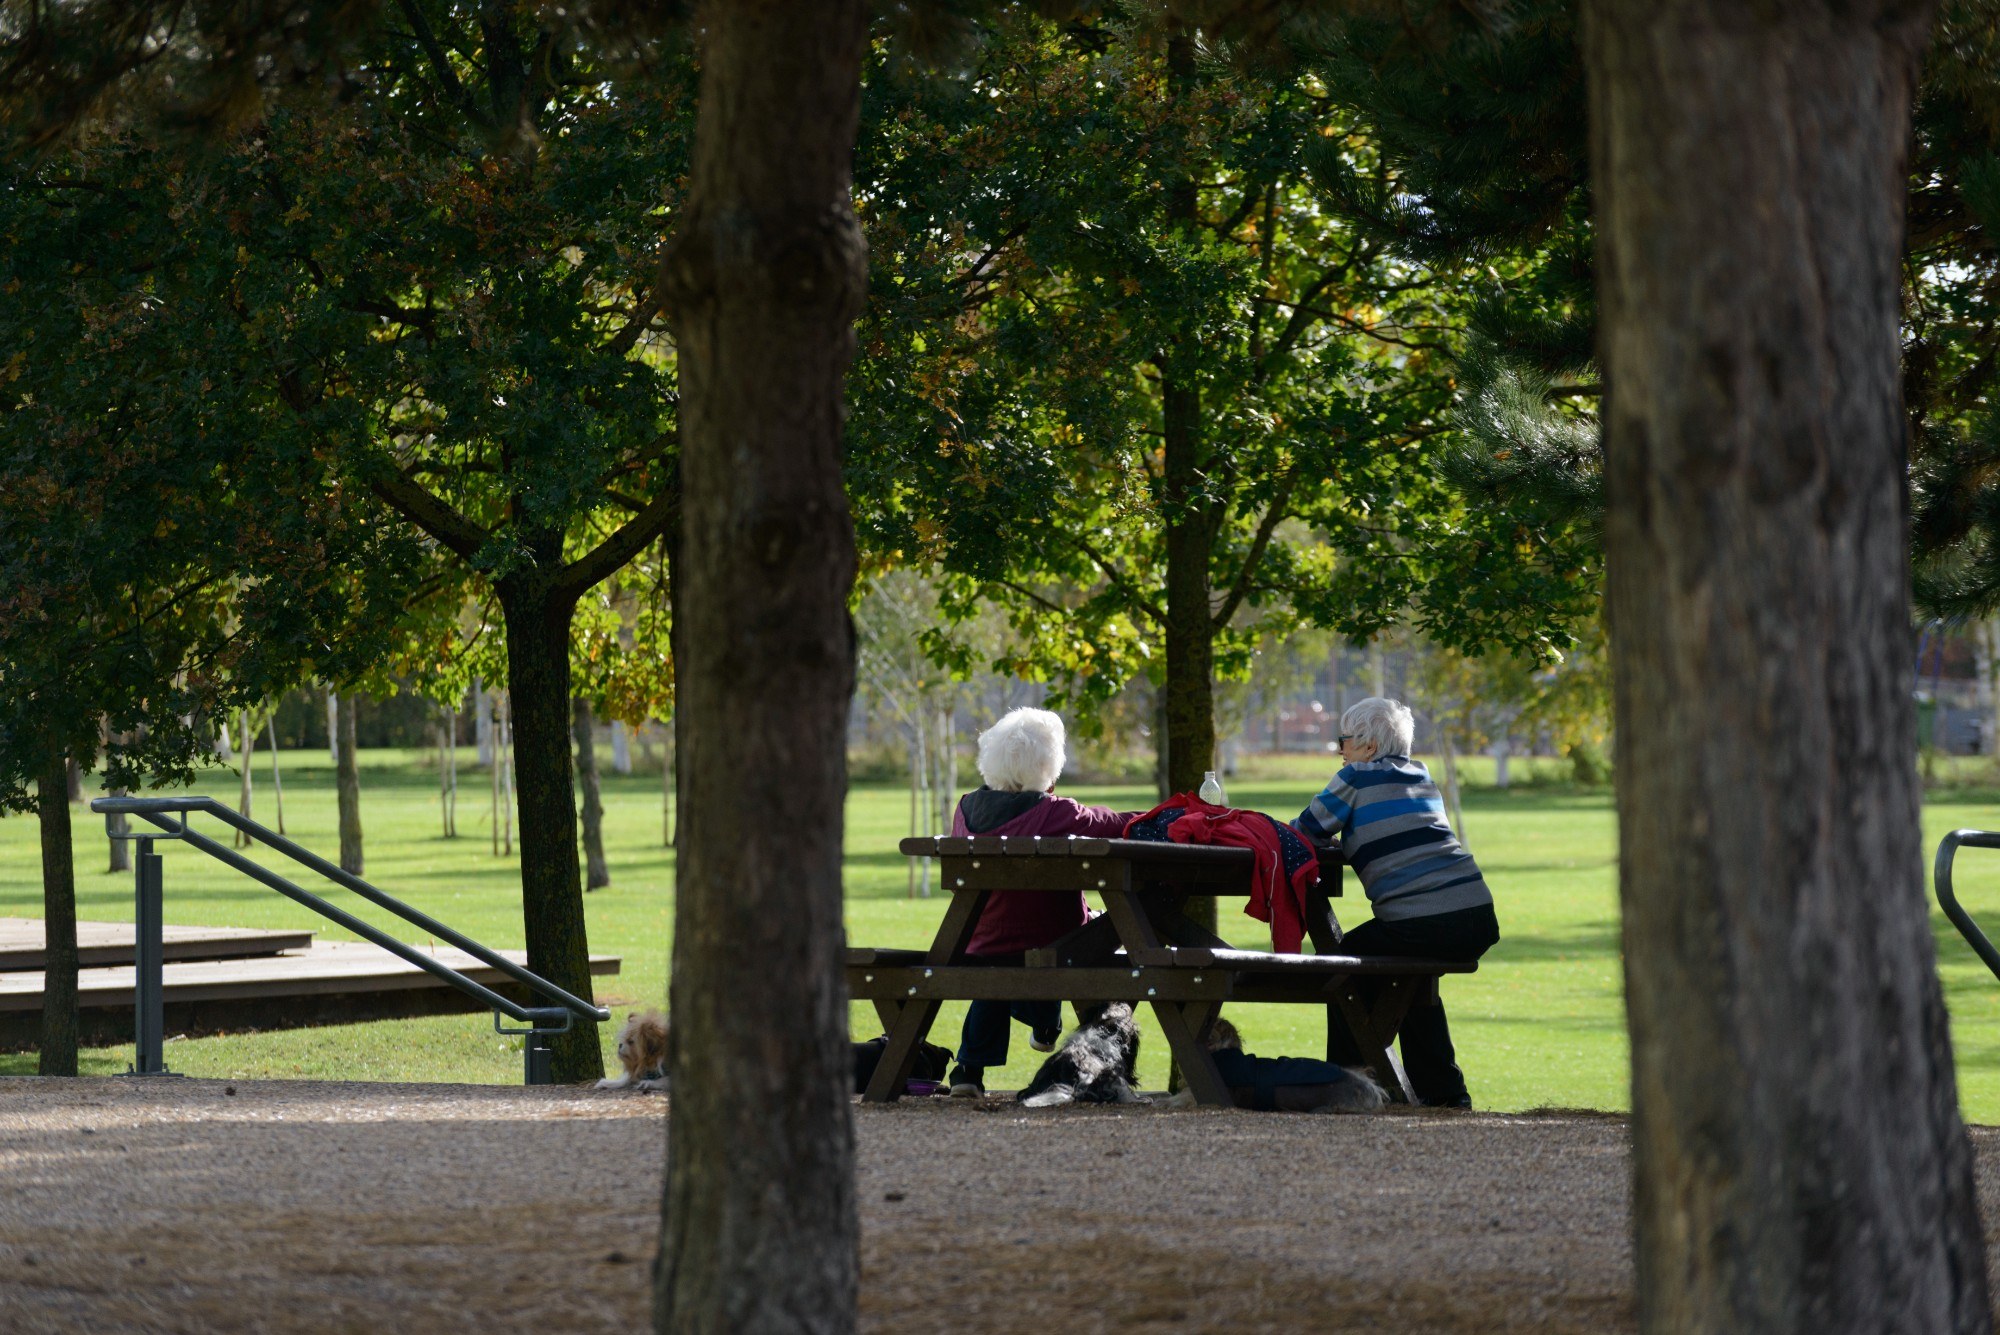 A couple in Thames Barrier Park